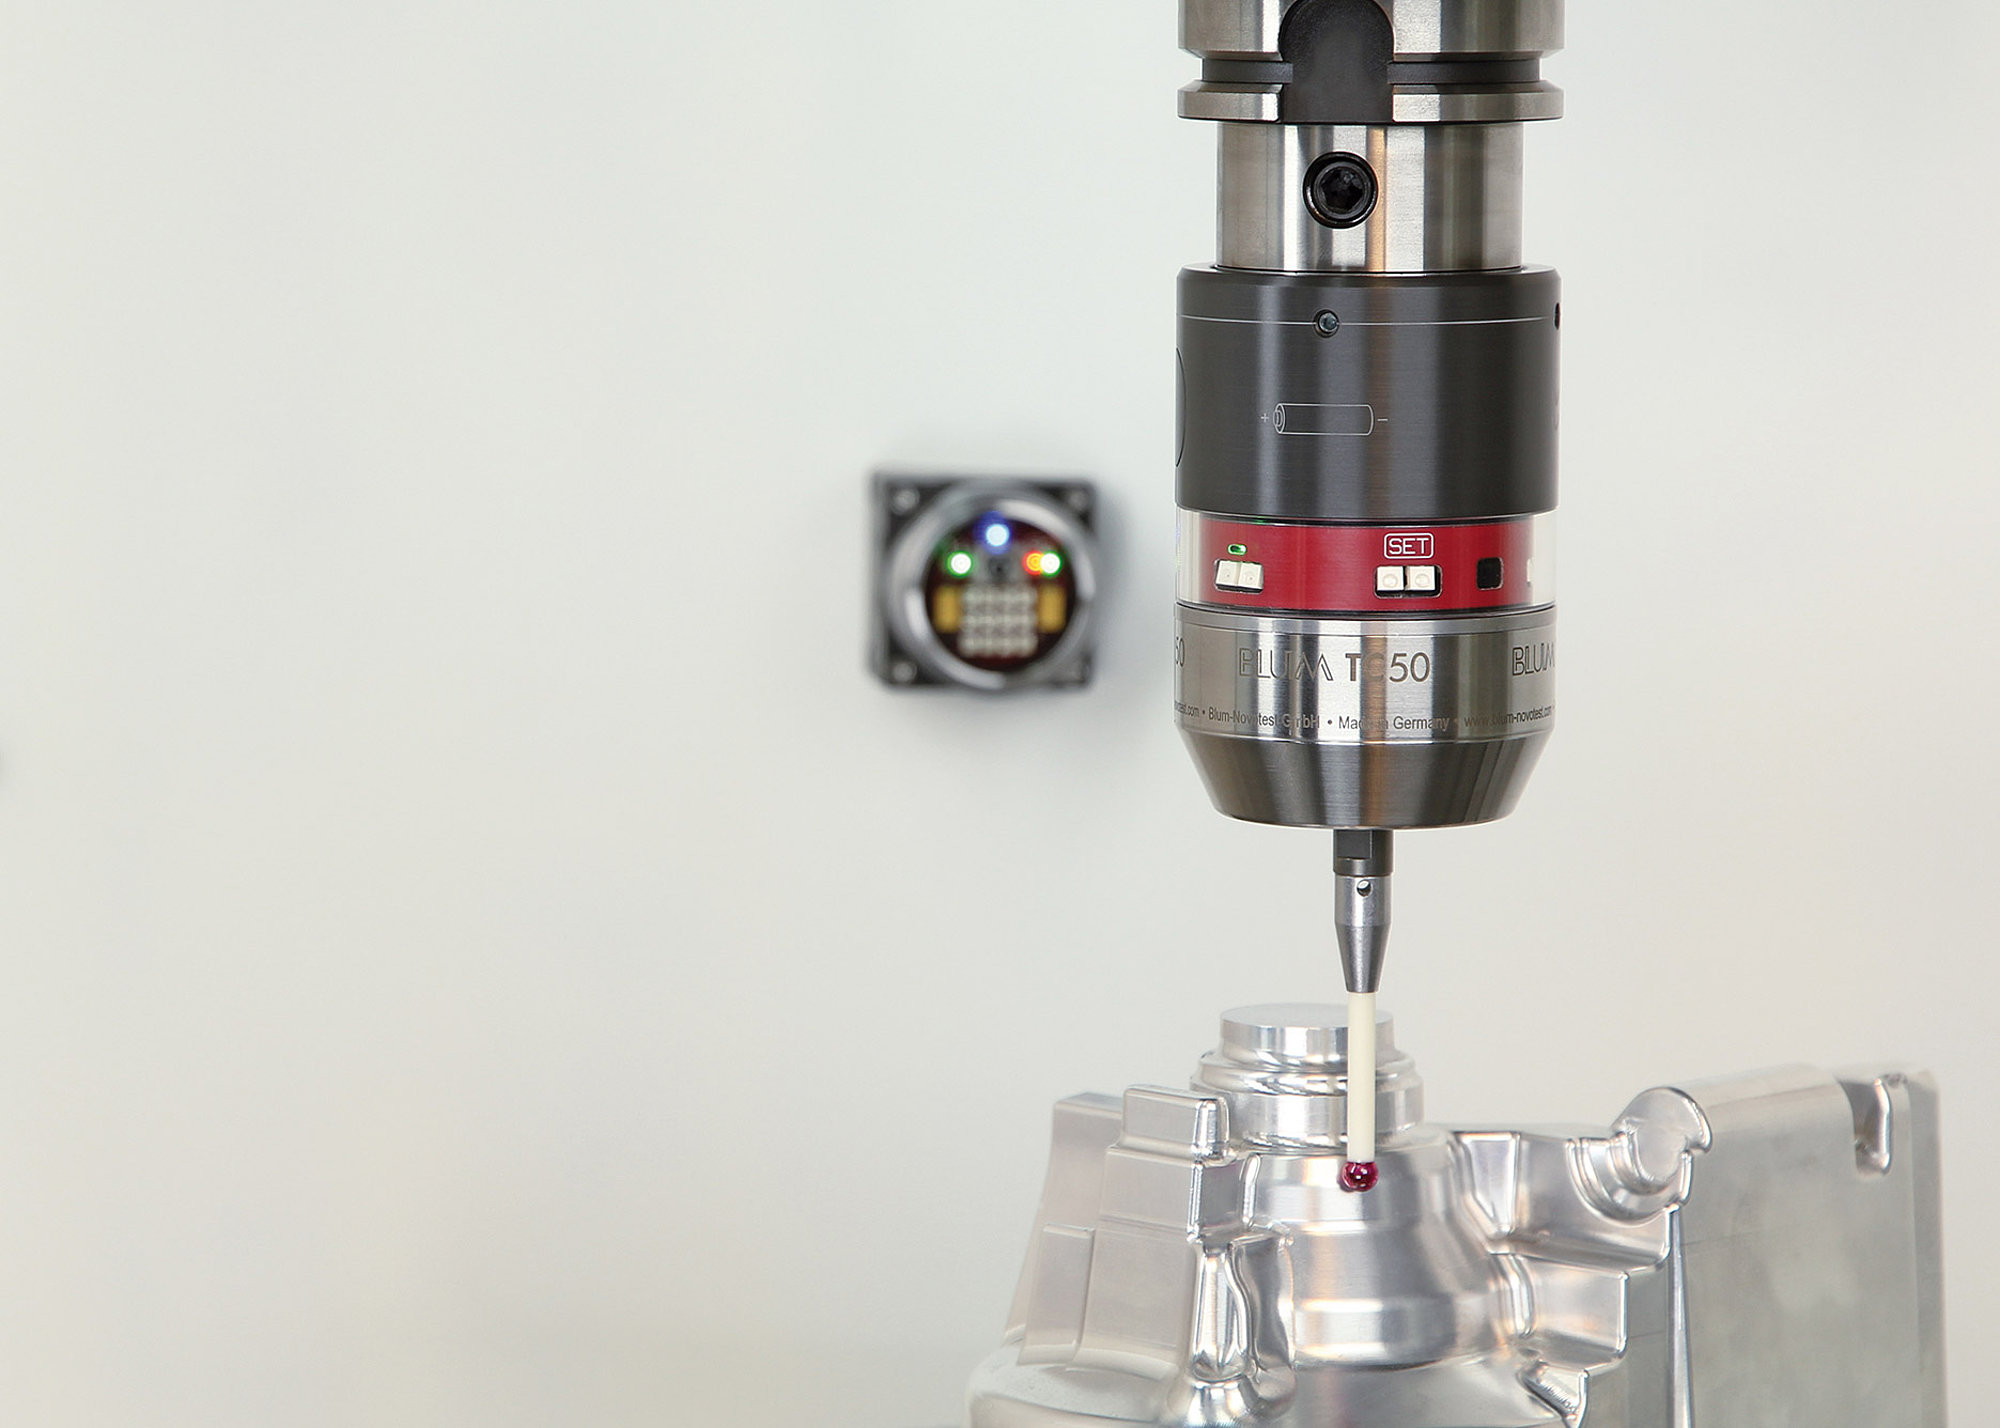 Measuring cycles for CNC touch probe for workpiece measurement